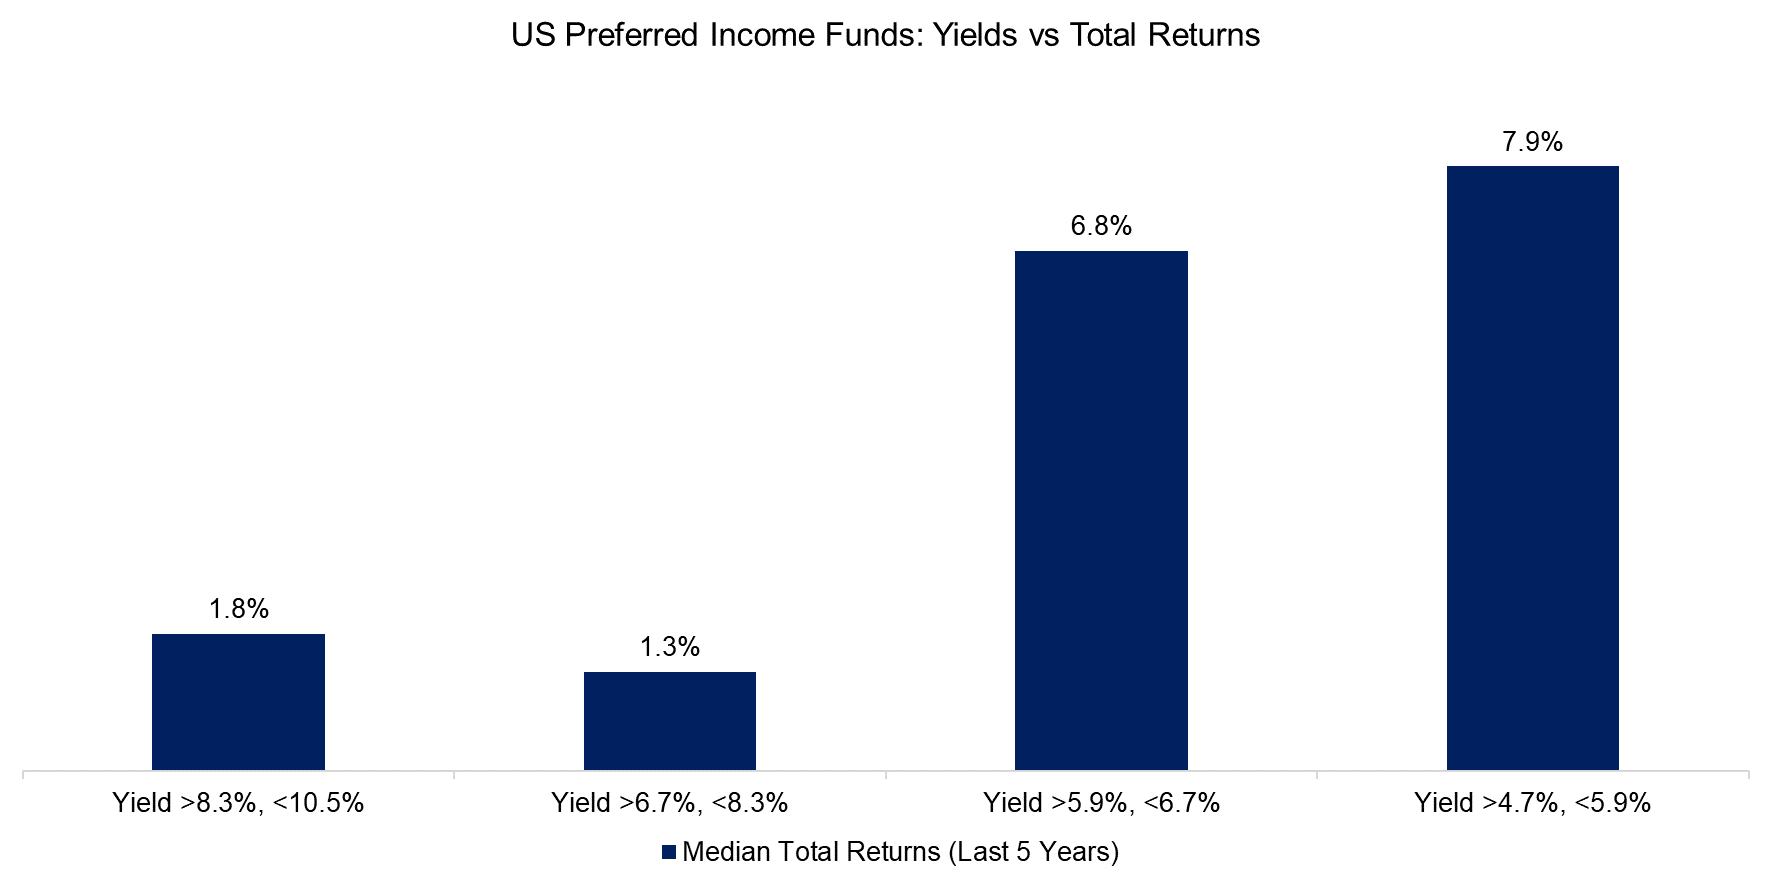 US Preferred Income Funds Yields vs Total Returns